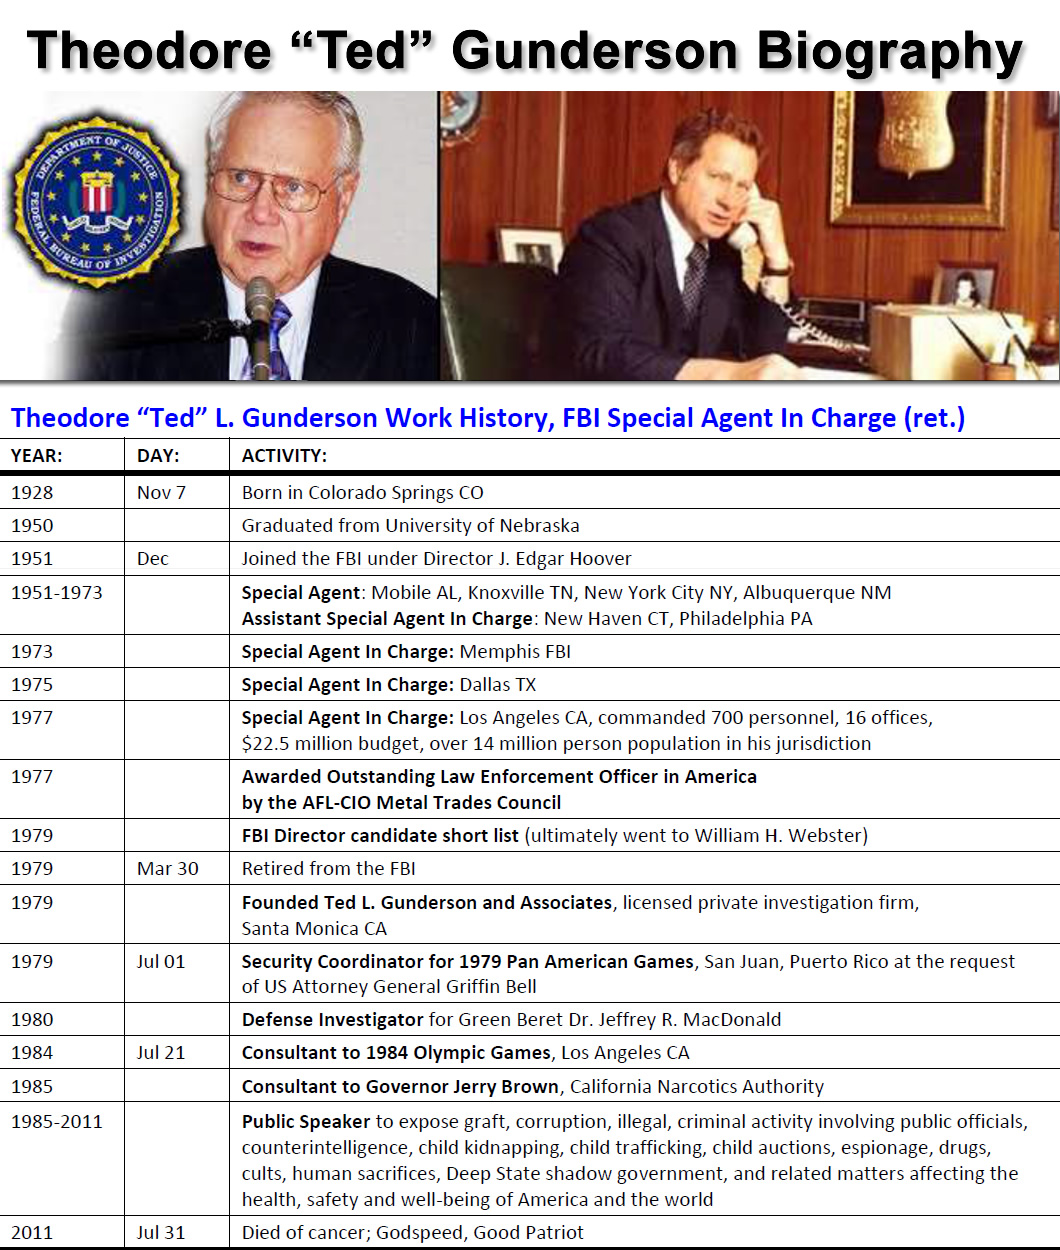 Theodore 'Ted' L. Gunderson Work History, FBI Special Agent In Charge (ret.); 1928, Nov 7, Born in Colorado Springs CO; 1950, Graduated from University of Nebraska; 1951, Dec, Joined the FBI under Director J. Edgar Hoover; 1951-1973, Special Agent: Mobile AL, Knoxville TN, New York City NY, Albuquerque NM; Assistant Special Agent In Charge: New Haven CT, Philadelphia PA; 1973, Special Agent In Charge: Memphis FBI; 1975, Special Agent In Charge: Dallas TX; 1977, Special Agent In Charge: Los Angeles CA, commanded 700 personnel, $22.5 million budget, 1979, FBI Director candidate short list (ultimately went to William H. Webster); 1977, Awarded Outstanding Law Enforcement Officer in America by the AFL-CIO Metal Trades Council; 1979, Mar 30, Retired from the FBI; 1979, Founded Ted L. Gunderson and Associates, licensed private investigation firm, Santa Monica CA; 1979, Jul 01, Security Coordinator for 1979 Pan American Games, San Juan, Puerto Rico at the request of US Attorney General Griffin Bell; 1980, Defense Investigator for Green Beret Dr. Jeffrey R. MacDonald; 1984, Jul 21, Consultant to 1984 Olympic Games, Los Angeles CA; 1985, Consultant to Governor Jerry Brown, California Narcotics Authority; 1985-2011, Public Speaker to expose graft, corruption, illegal, criminal activity involving public officials, counterintelligence, child kidnapping, child trafficking, child auctions, espionage, drugs, cults, human sacrifices, Deep State shadow government, and related matters affecting the health, safety and well-being of America and the world; 2011, Jul 31, Died of cancer; Godspeed Good Patriot